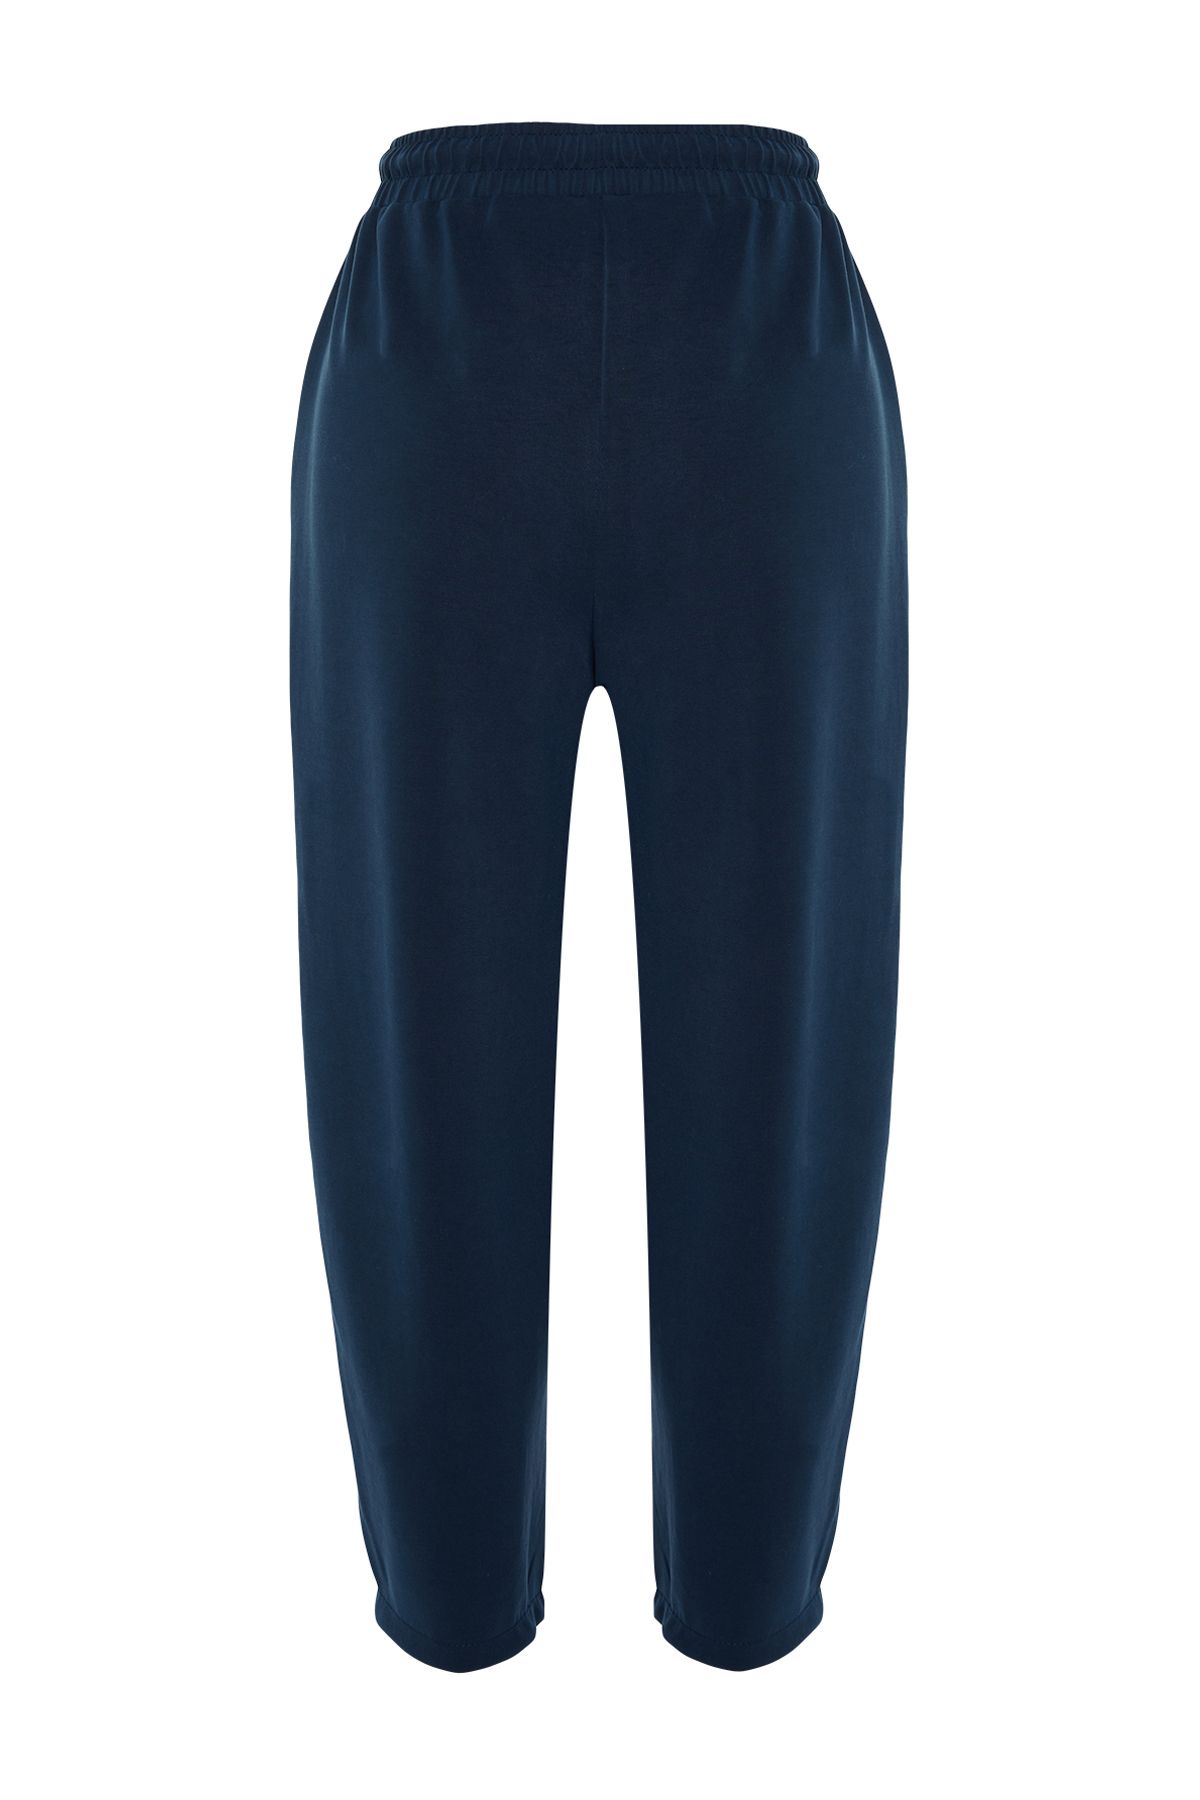 Trendyol Collection Navy Blue Modal Soft Fabric High Waist Stretch Knitted  Trousers TWOAW24PL00361 - Trendyol